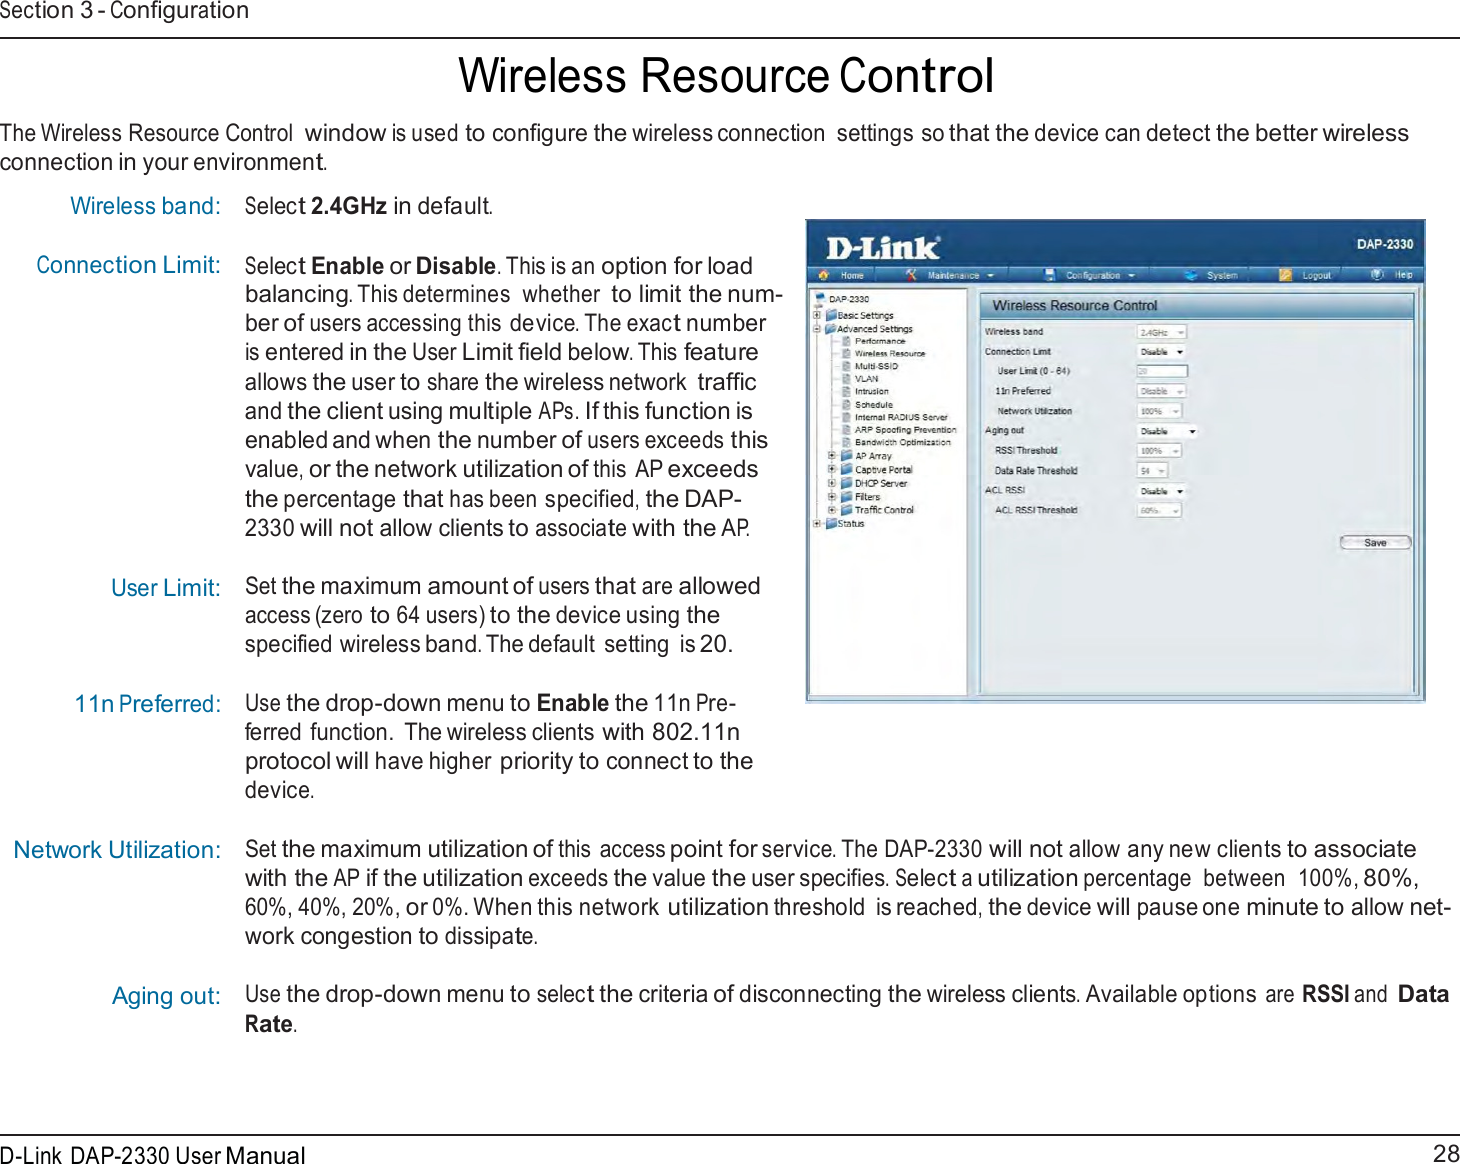 28 D-Link DAP-2330 User ManualSection 3 - Configuration     Wireless Resource Control  The Wireless Resource Control window is used to configure the wireless connection  settings so that the device can detect the better wireless connection in your environment.  Wireless band: Connection Limit:              User Limit:     11n Preferred: Network Utilization: Aging out:  Select 2.4GHz in default.   Select Enable or Disable. This is an option for load balancing. This determines  whether to limit the num- ber of users accessing this device. The exact number is entered in the User Limit field below. This feature allows the user to share the wireless network traffic and the client using multiple APs. If this function is enabled and when the number of users exceeds this value, or the network utilization of this  AP exceeds the percentage that has been specified, the DAP- 2330 will not allow clients to associate with the AP.   Set the maximum amount of users that are allowed access (zero to 64 users) to the device using the specified wireless band. The default  setting  is 20.  Use the drop-down menu to Enable the 11n Pre- ferred function.  The wireless clients with 802.11n protocol will have higher priority to connect to the device.  Set the maximum utilization of this  access point for service. The DAP-2330 will not allow any new clients to associate with the AP if the utilization exceeds the value the user specifies. Select a utilization percentage  between  100%, 80%, 60%, 40%, 20%, or 0%. When this network utilization threshold is reached, the device will pause one minute to allow net- work congestion to dissipate.  Use the drop-down menu to select the criteria of disconnecting the wireless clients. Available options are RSSI and Data Rate. 